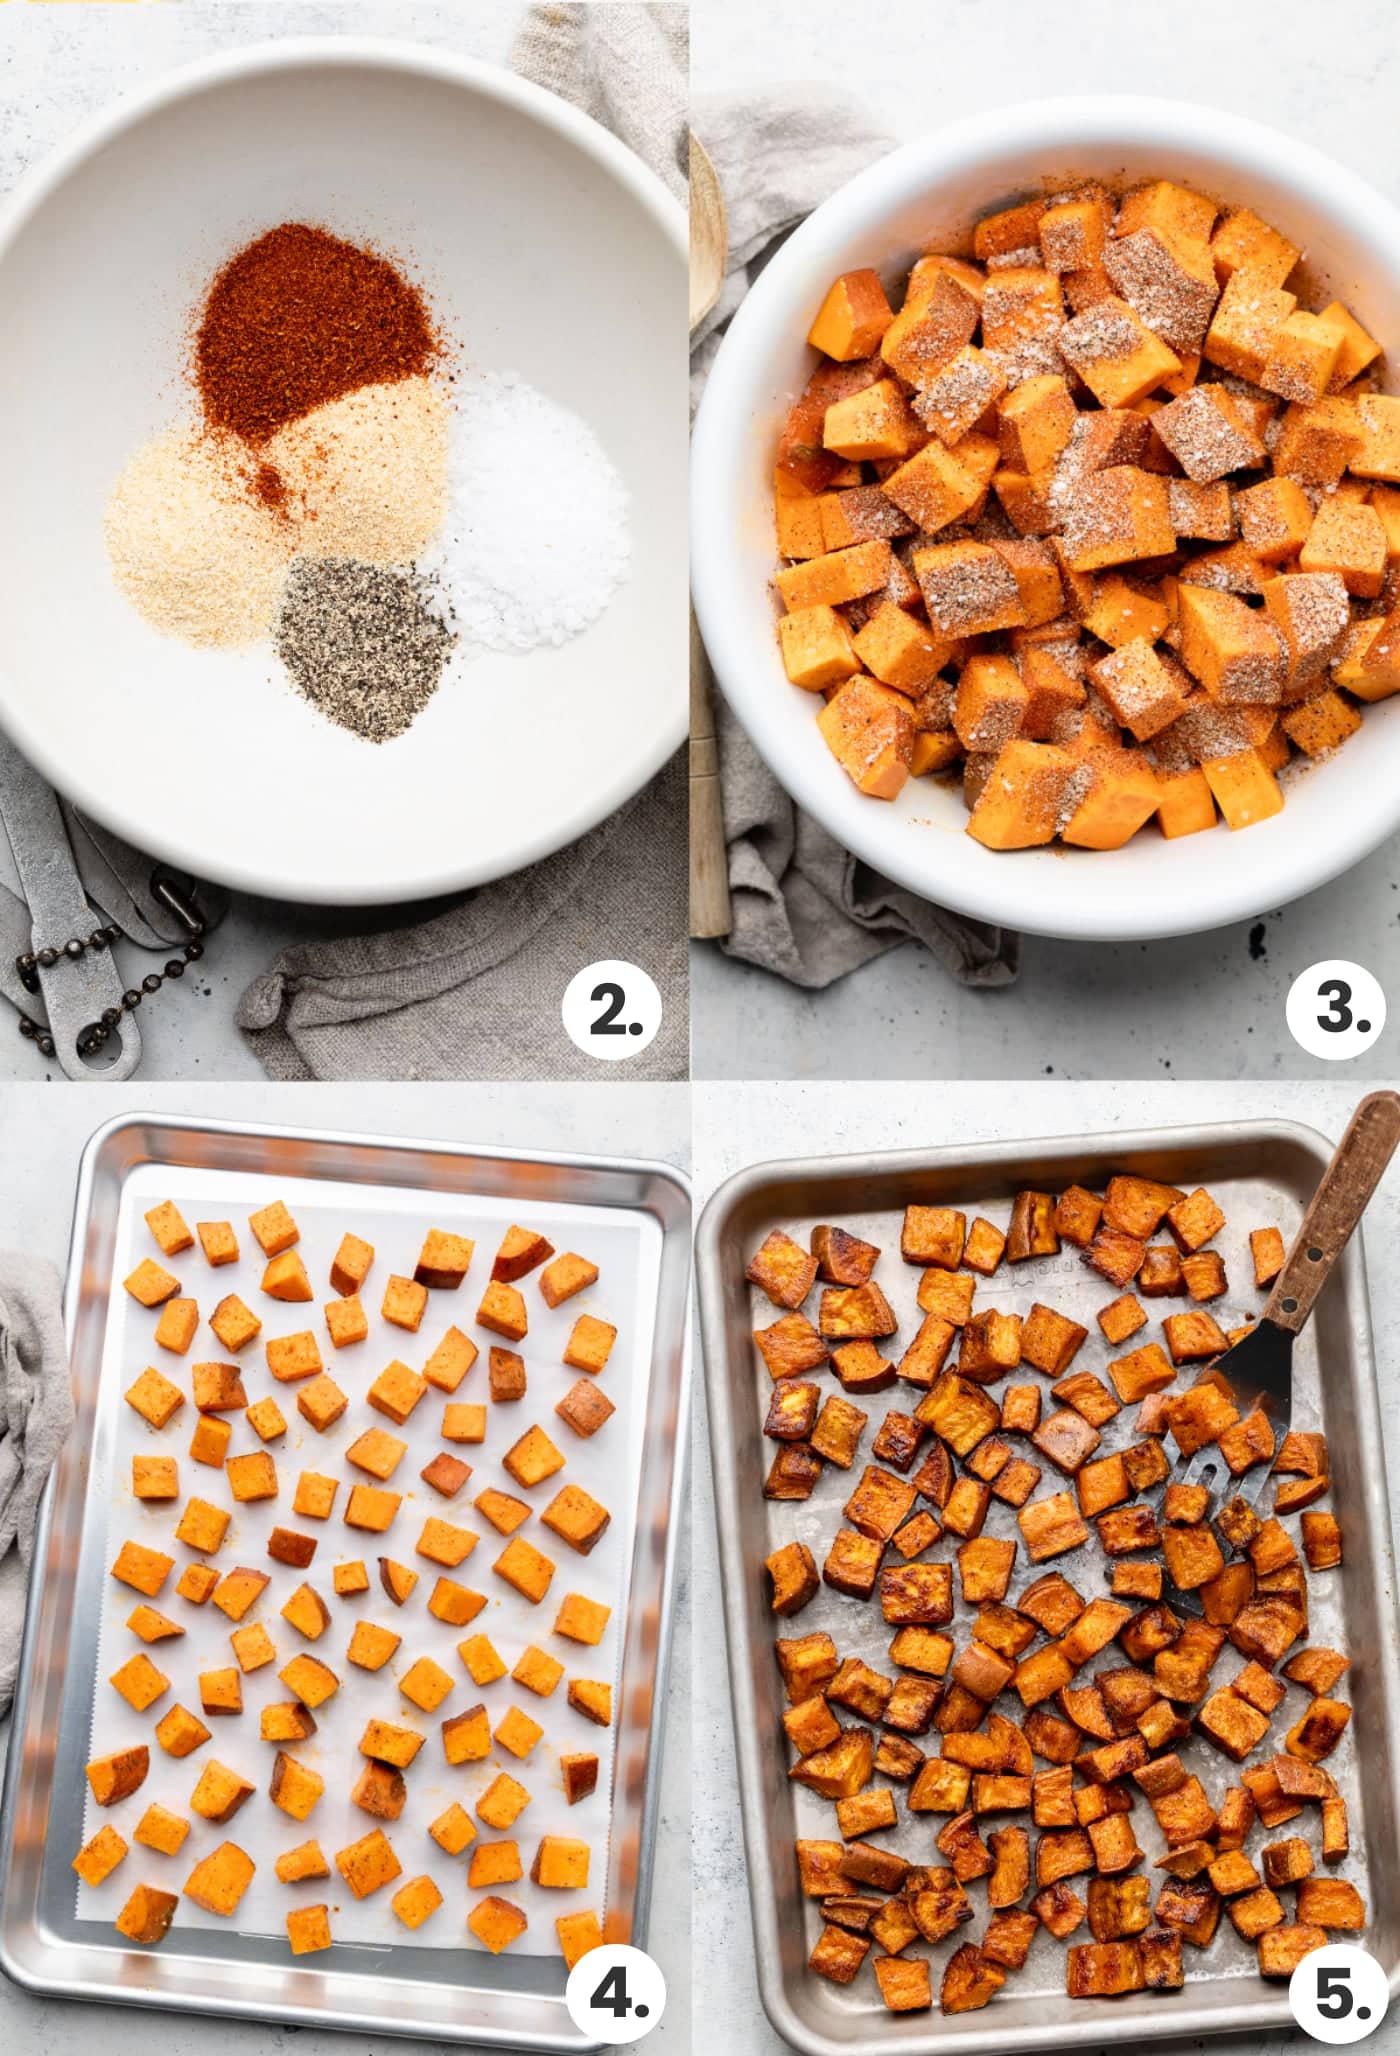 Step by step instructions for how to mix the spices and roast the sweet potatoes.